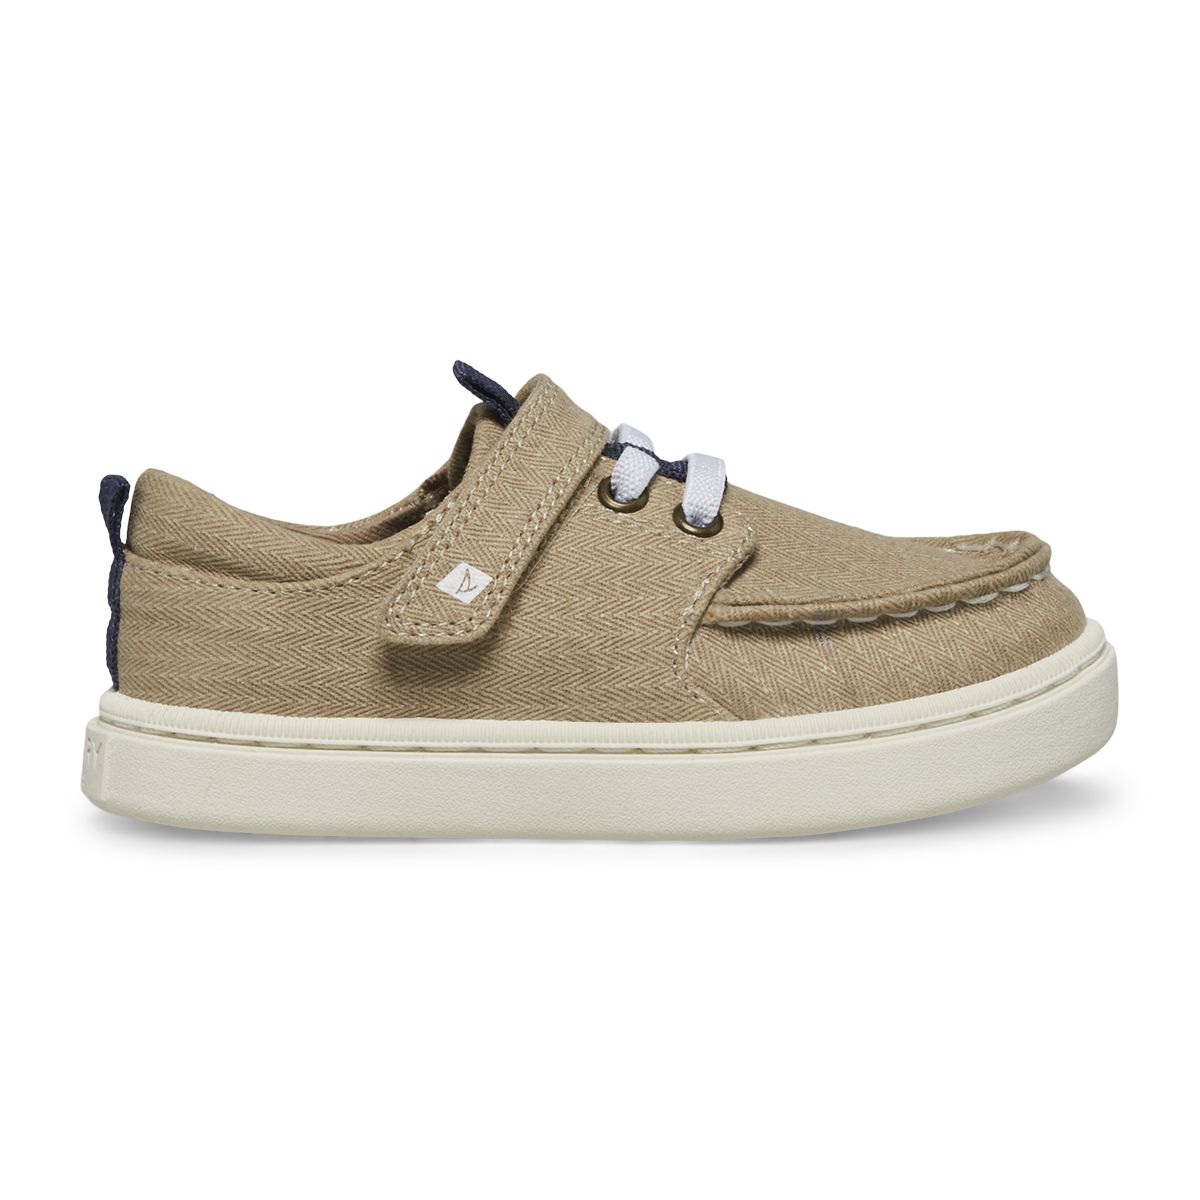 Sperry, Shoes, Sperrycruise Brown Sneakers Shoes Boys Size 6 M Womens  Size 8 Replacement Laces